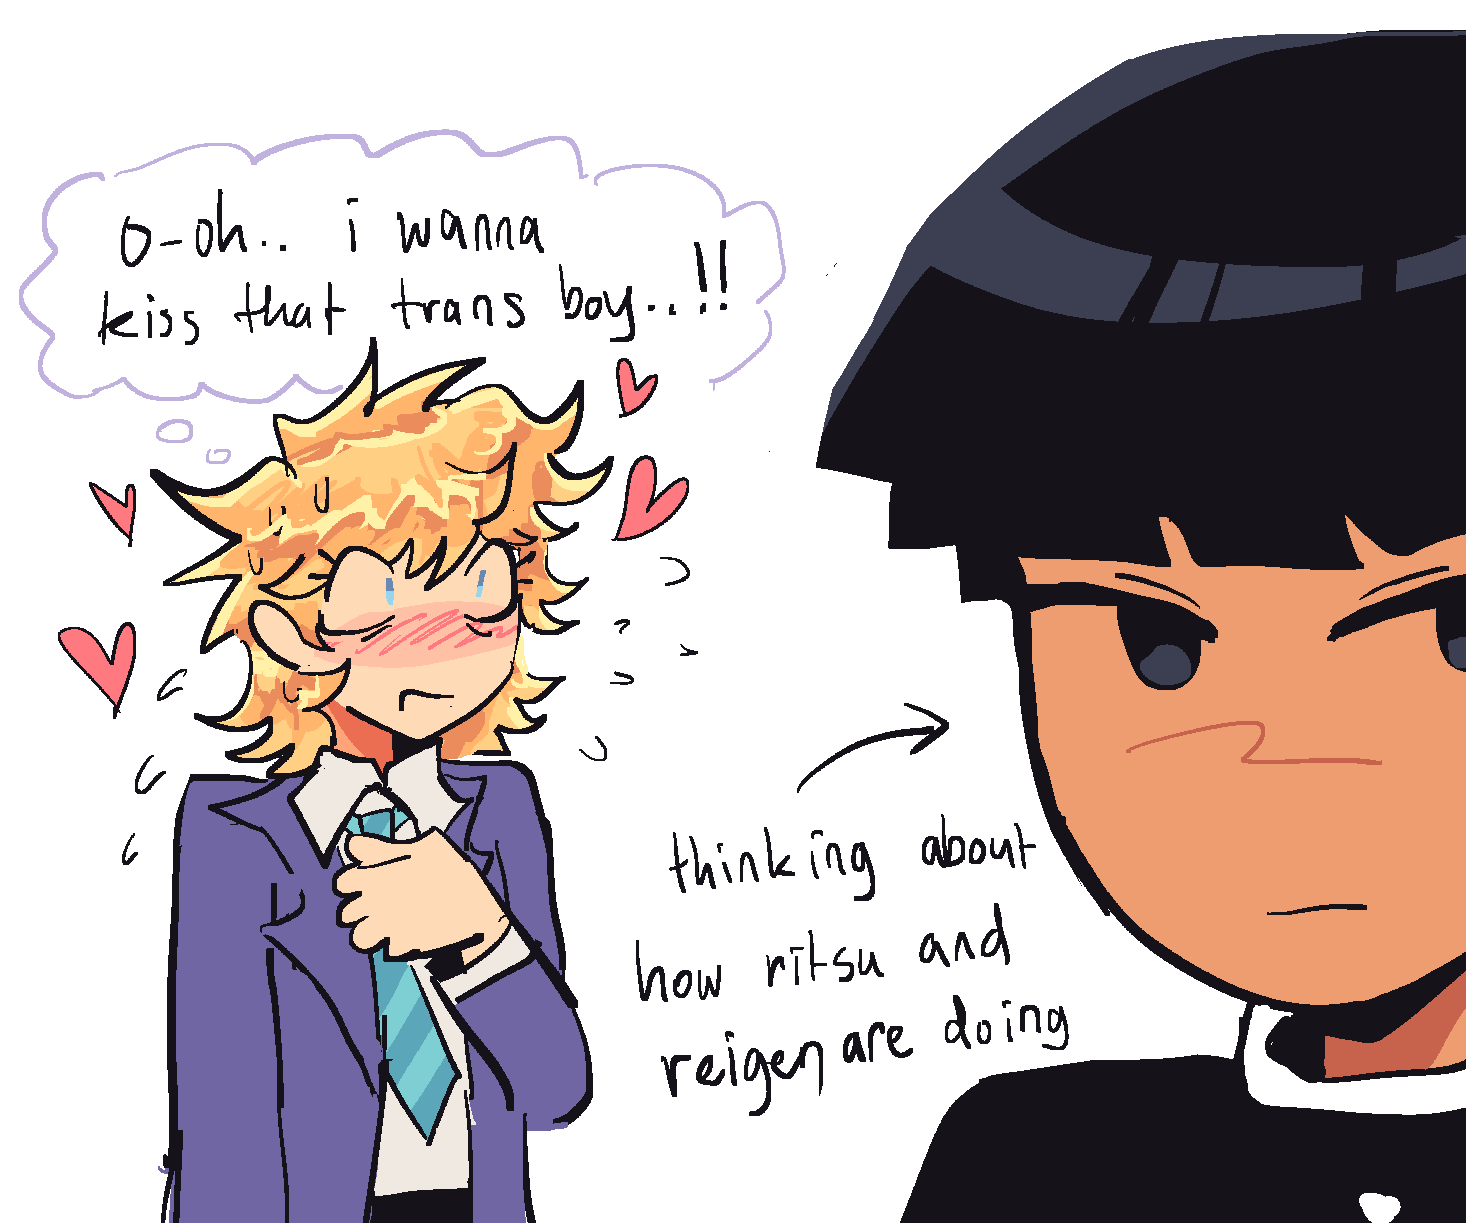 ID: a now transmasculine teru, looking at a distracted mob and says o-oh.. i wanna kiss that trans boy..!! in his mind. with hearts surrounding him. he is excessively sweating and nervous in the drawing. there is an arrow pointing at mob which simply says thinking about how ritsu and reigen are doing. /end id